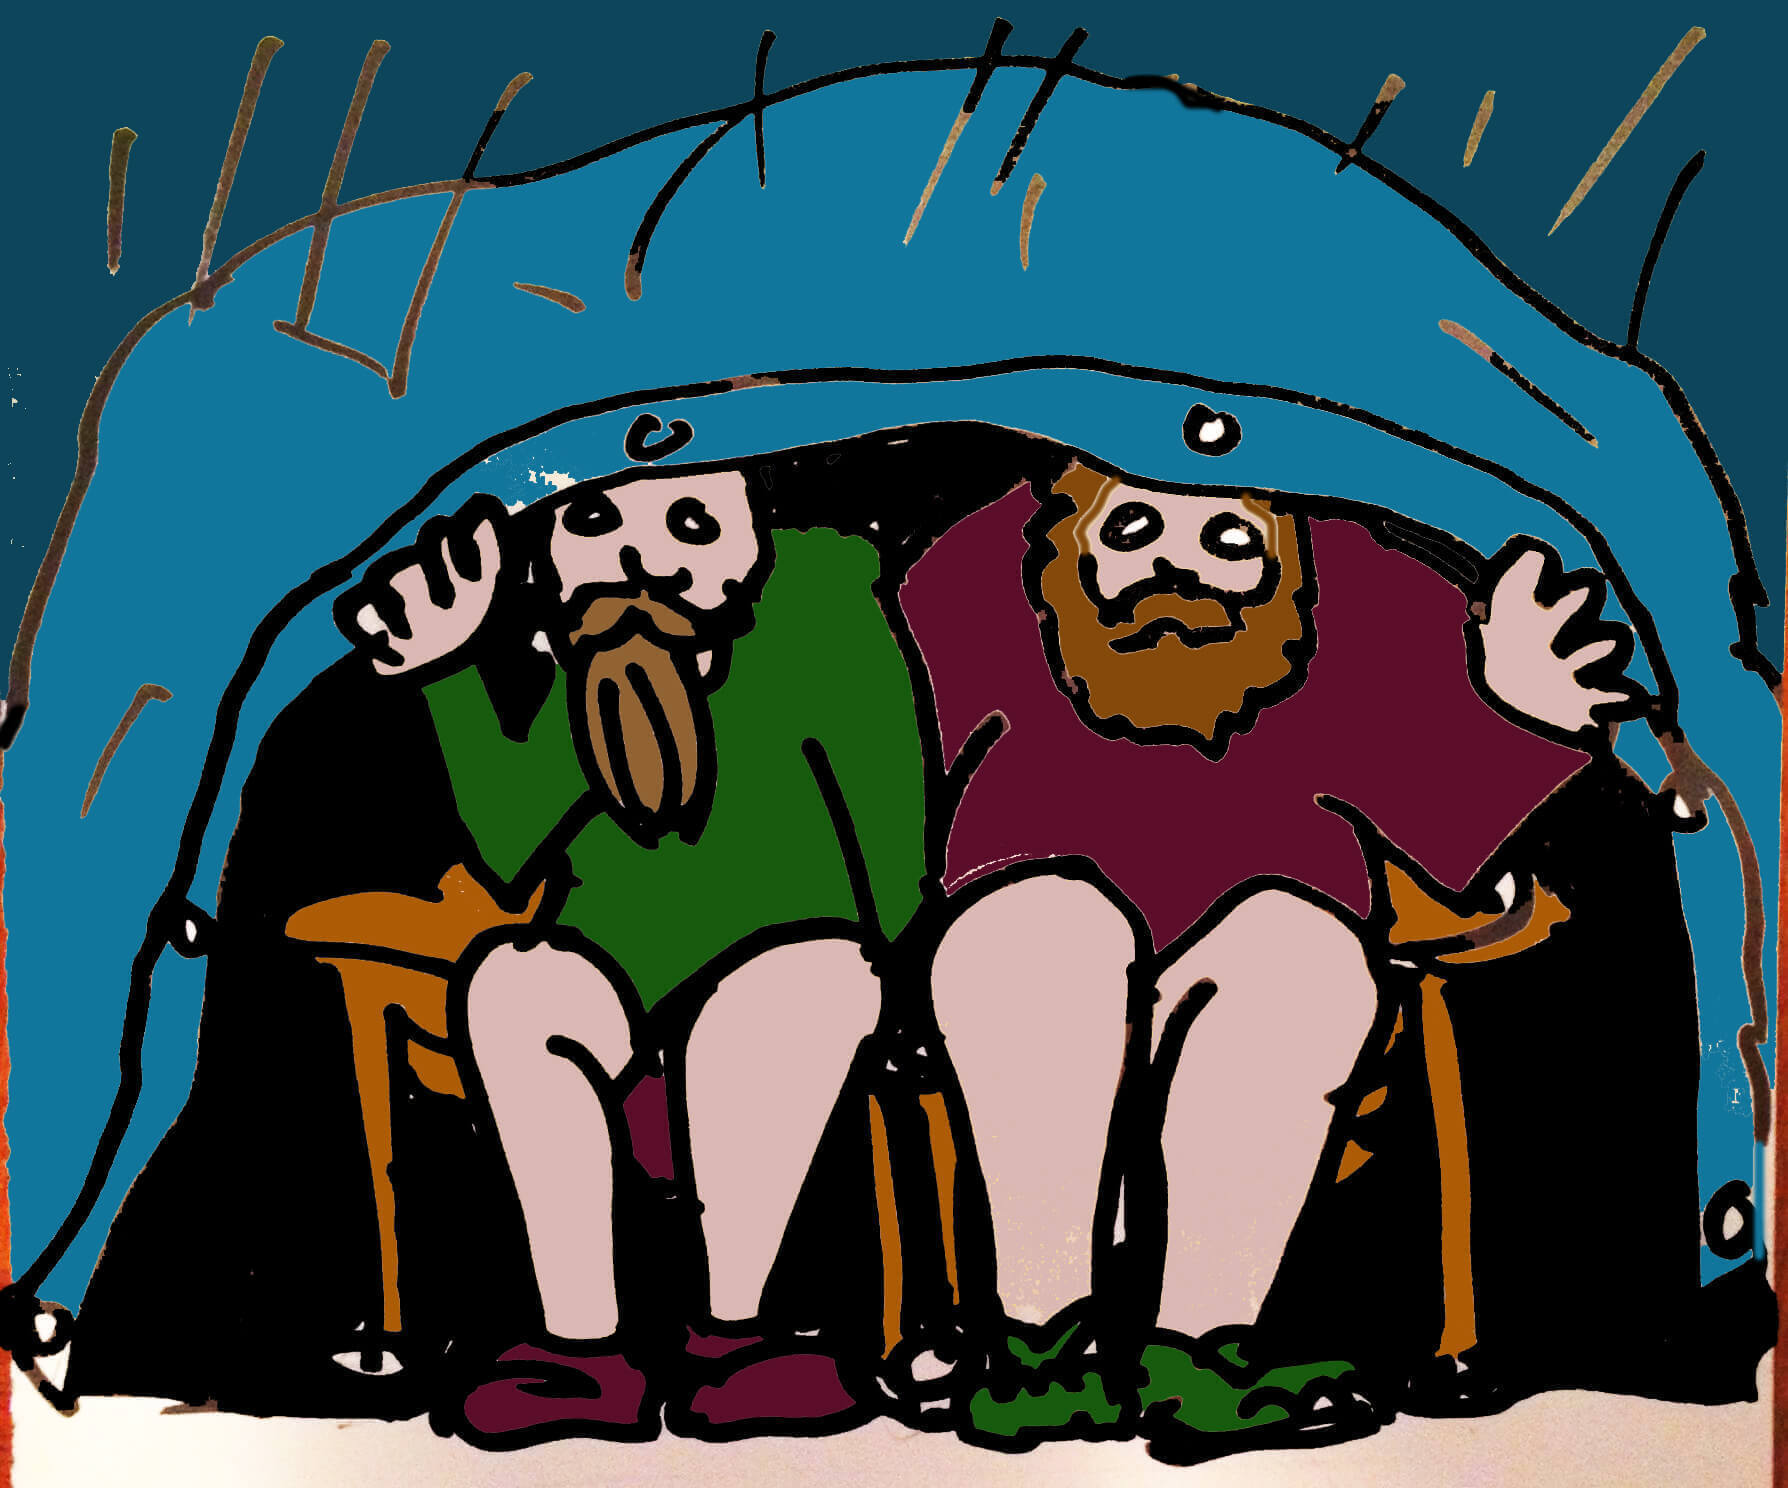 Color cartoon illustration of 2 bearded people sitting in chairs, underneath a blue tarp